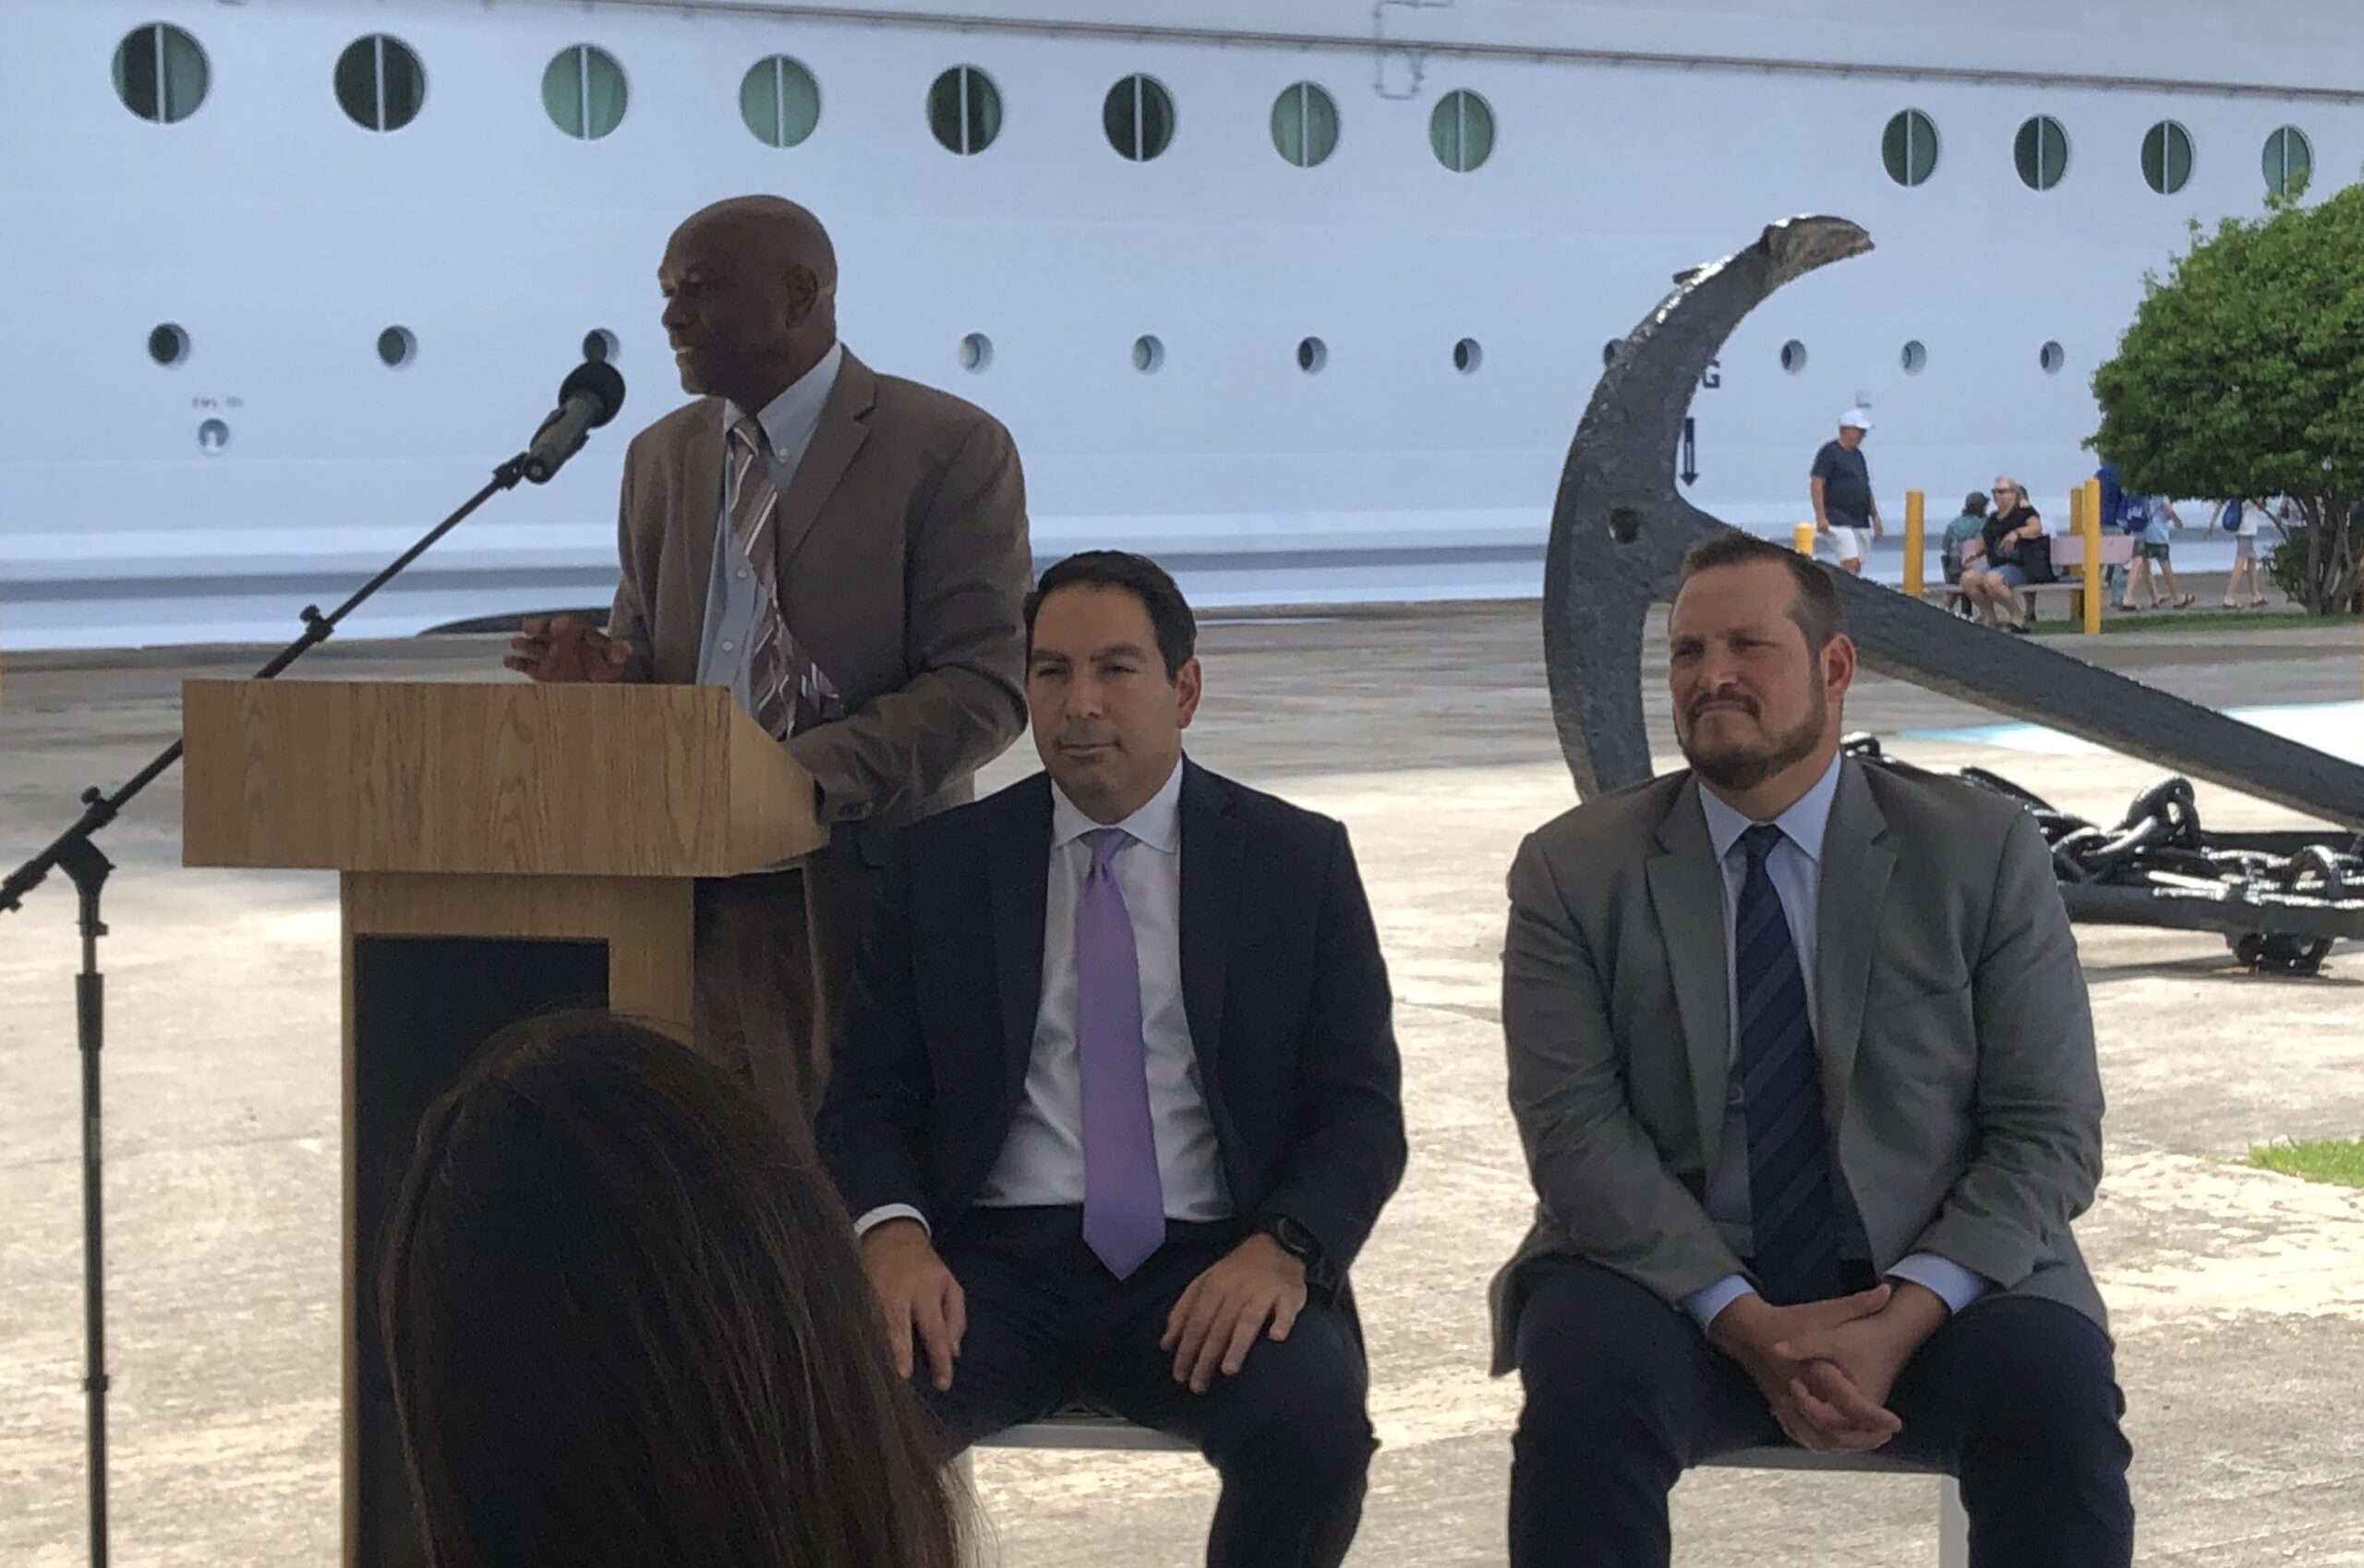 V.I. Port Authority Executive Director Carlton Dowe, left, is joined by Cruise Terminals International CEO Khaled Naja, center, and Royal Caribbean Group VP of Destination Development Joshua Carroll Wednesday at the Austin "Babe" Monsanto Marine Terminal in Crown Bay to announce a $250 million expansion of the facility. (Source photo by Sian Cobb)